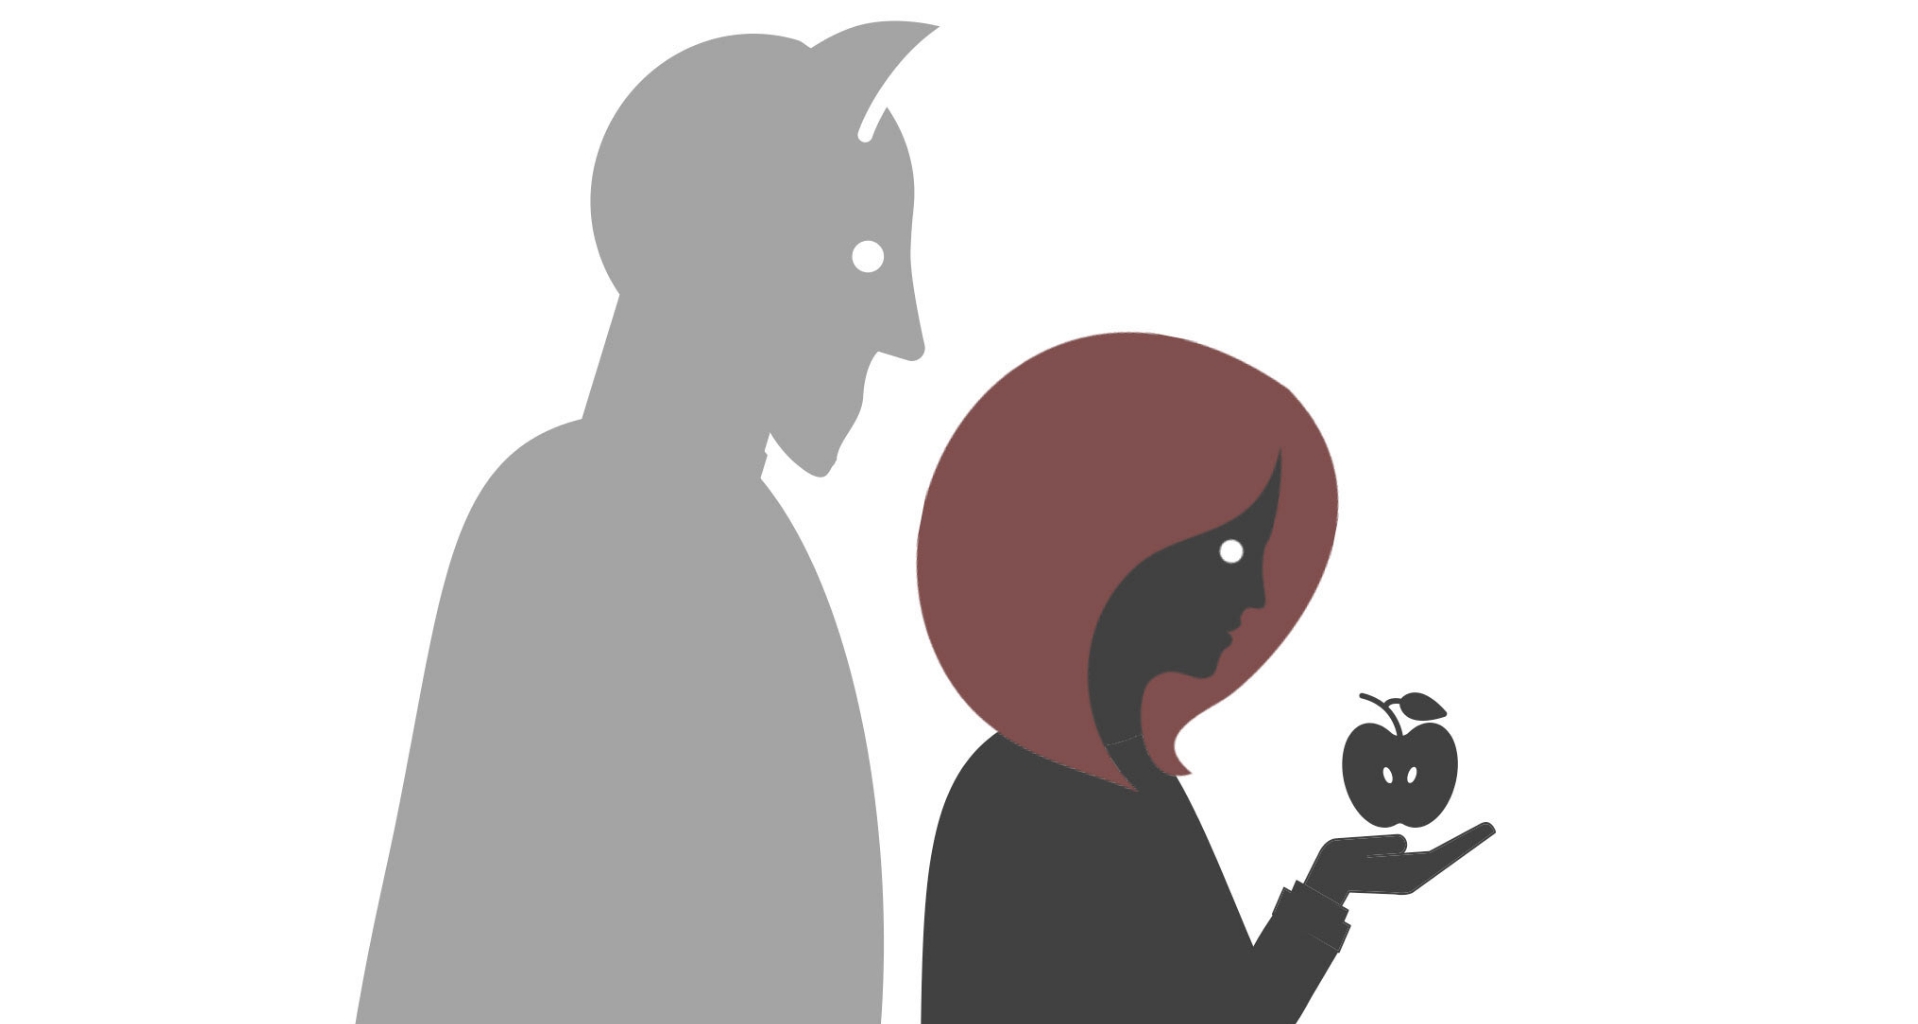 Image of a devil standing behind a woman who is looking at the apple she is holding